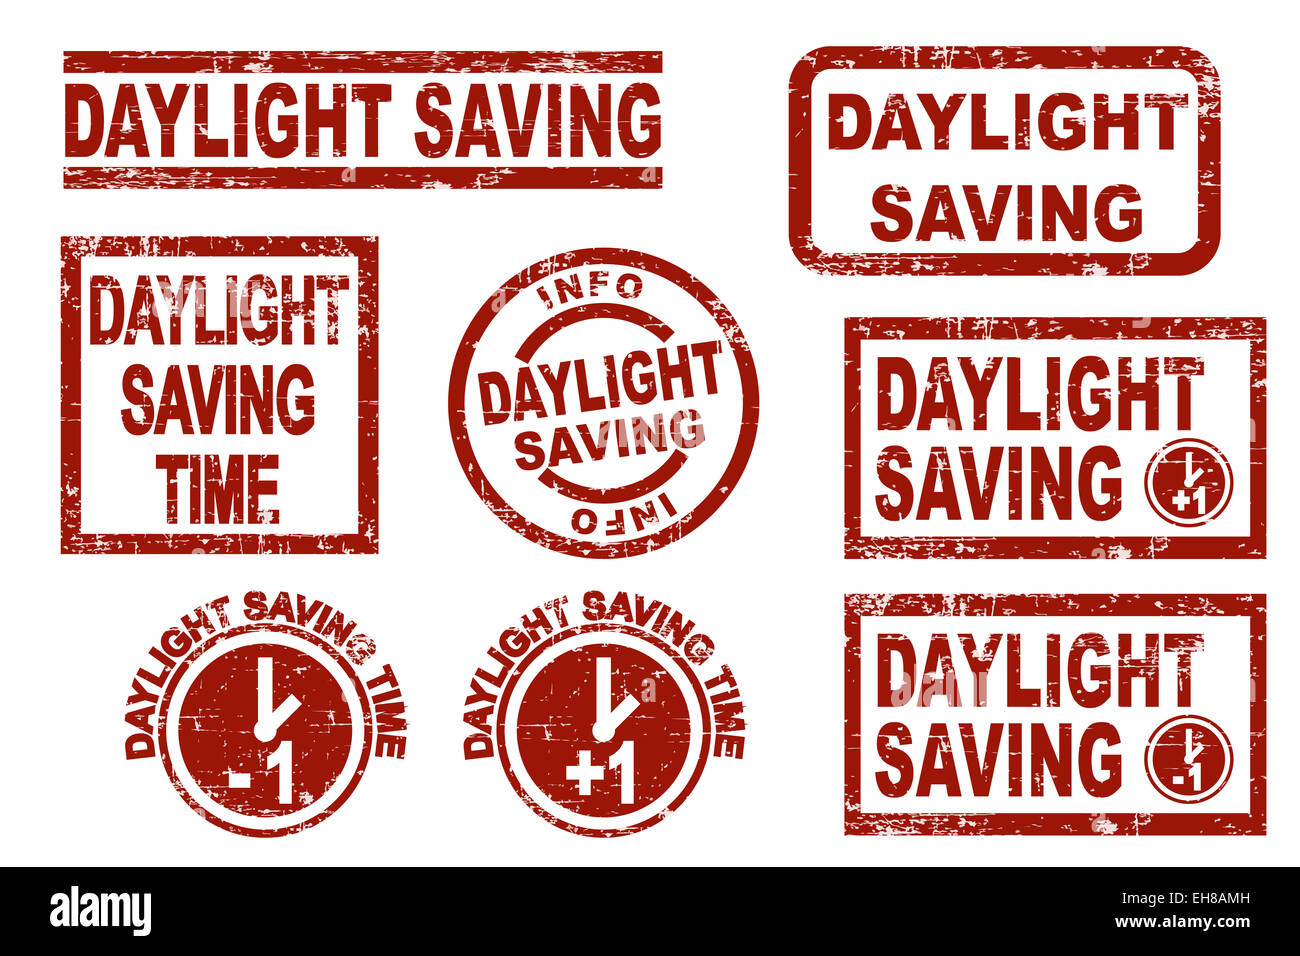 Set of red grunge style ink stamps showing terms of daylight saving time Stock Photo